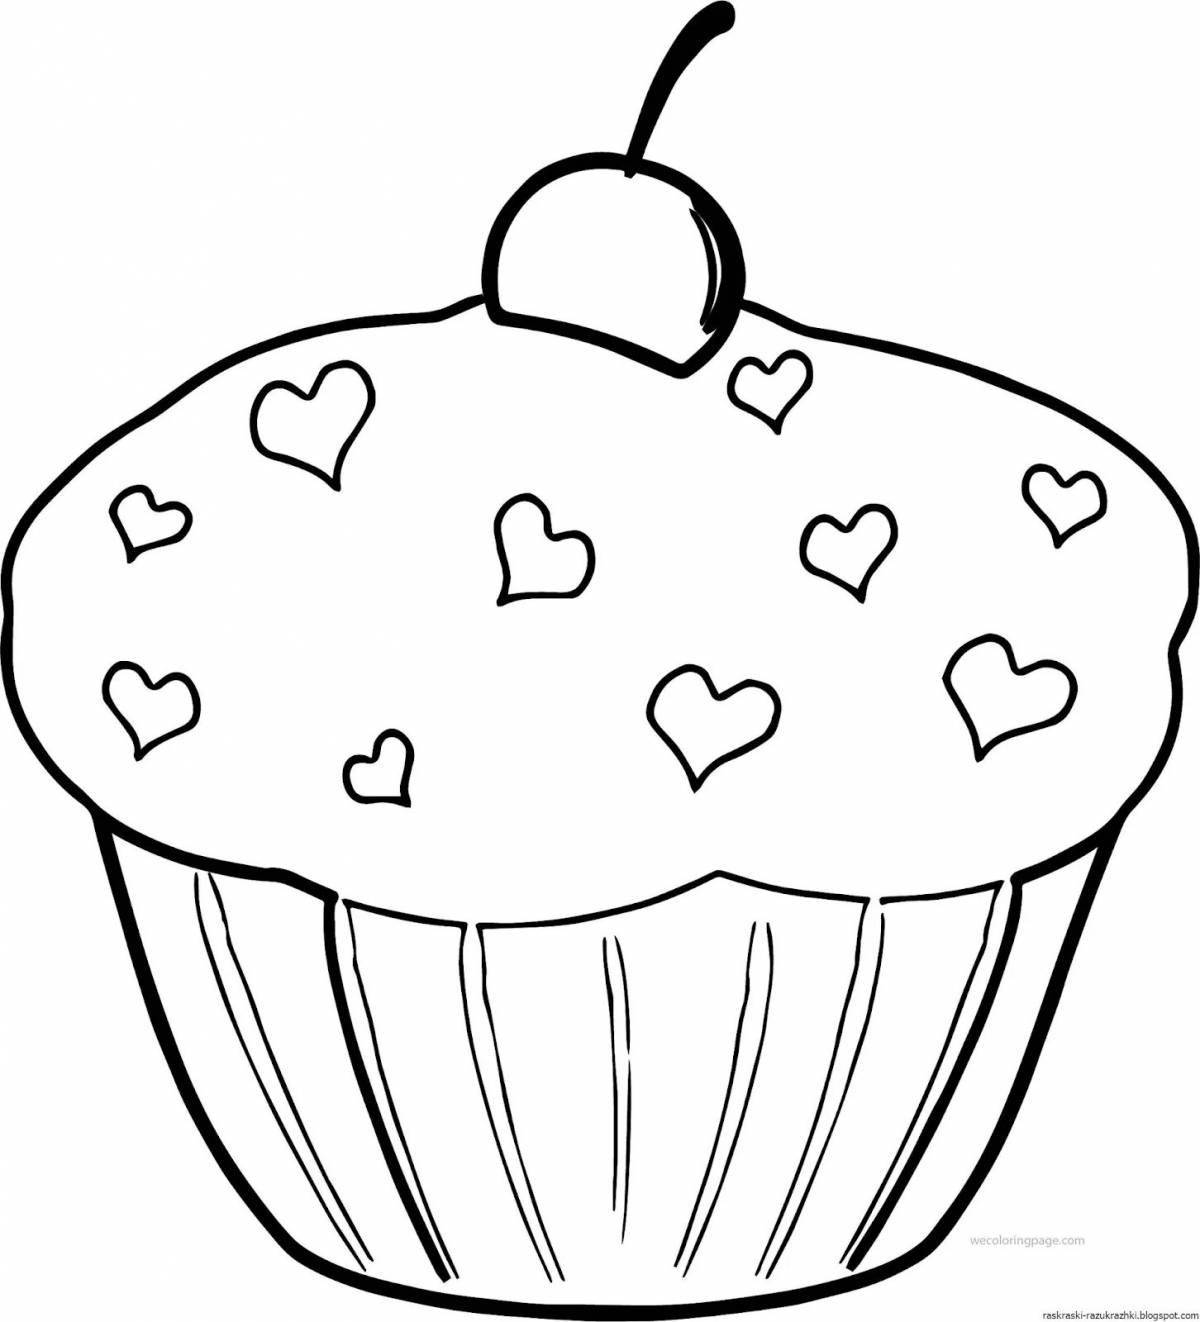 Sparkling sweets coloring pages